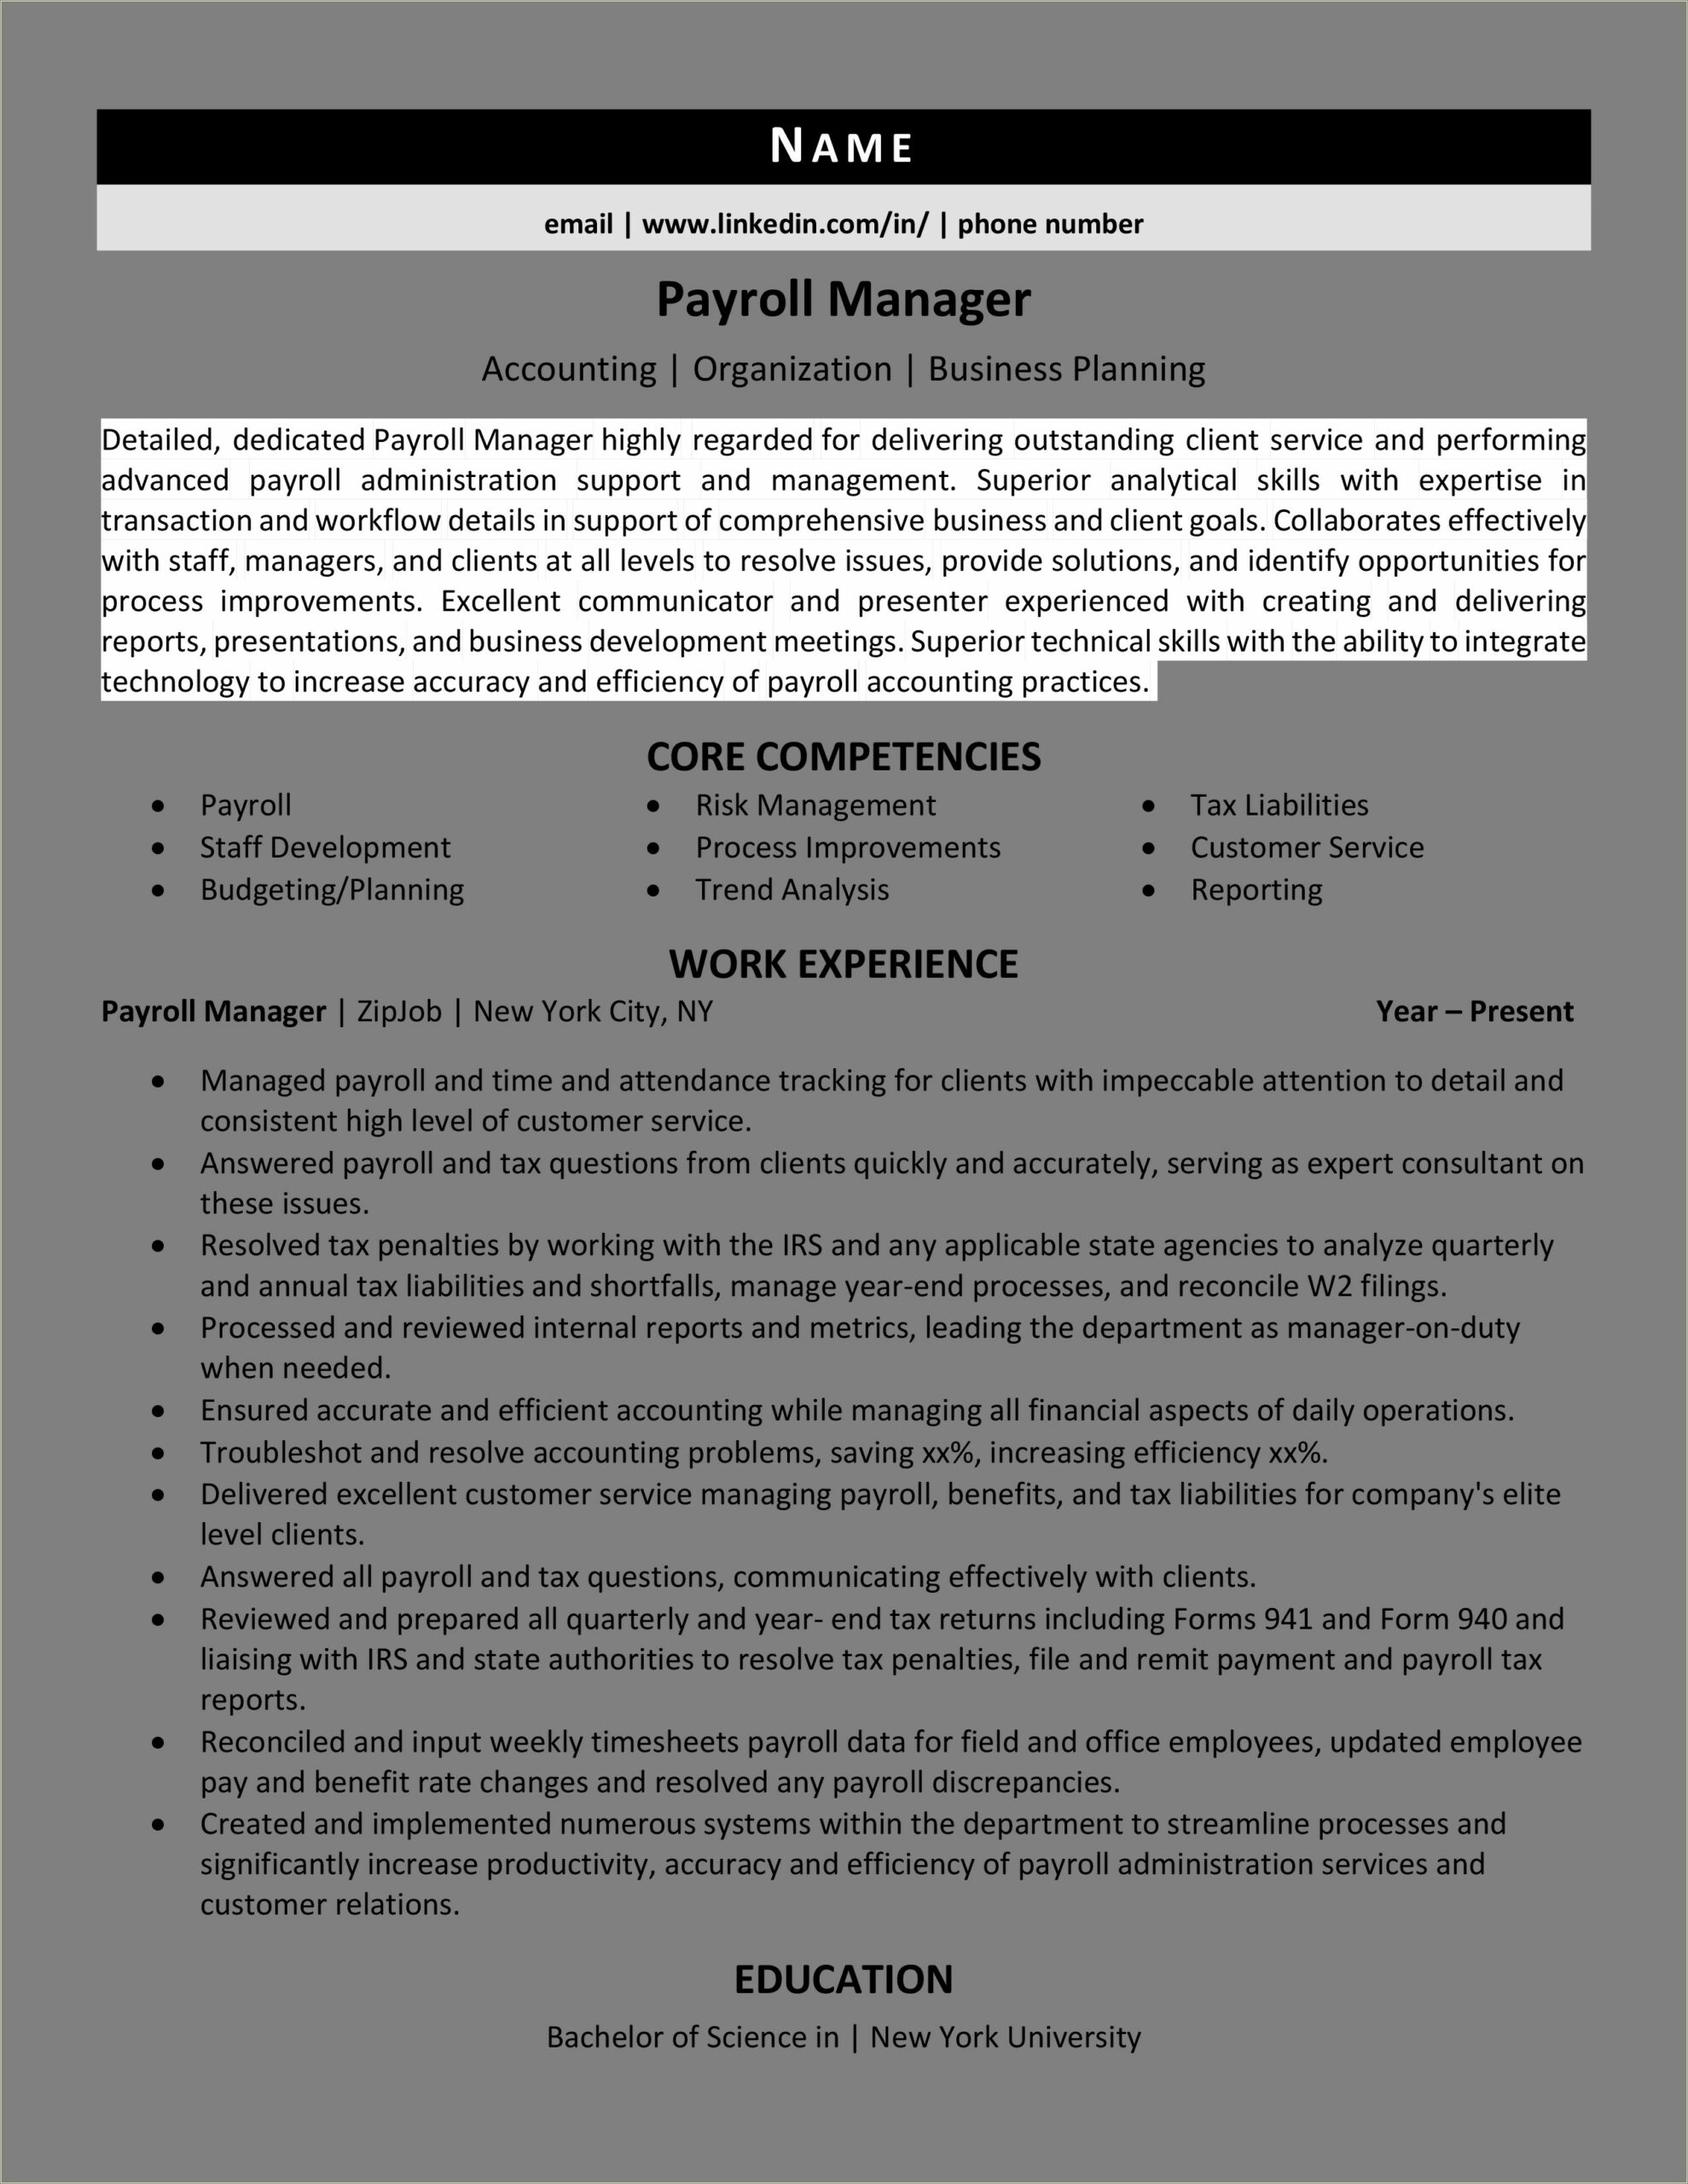 Resume For Accountant With Tax Experience And Payroll